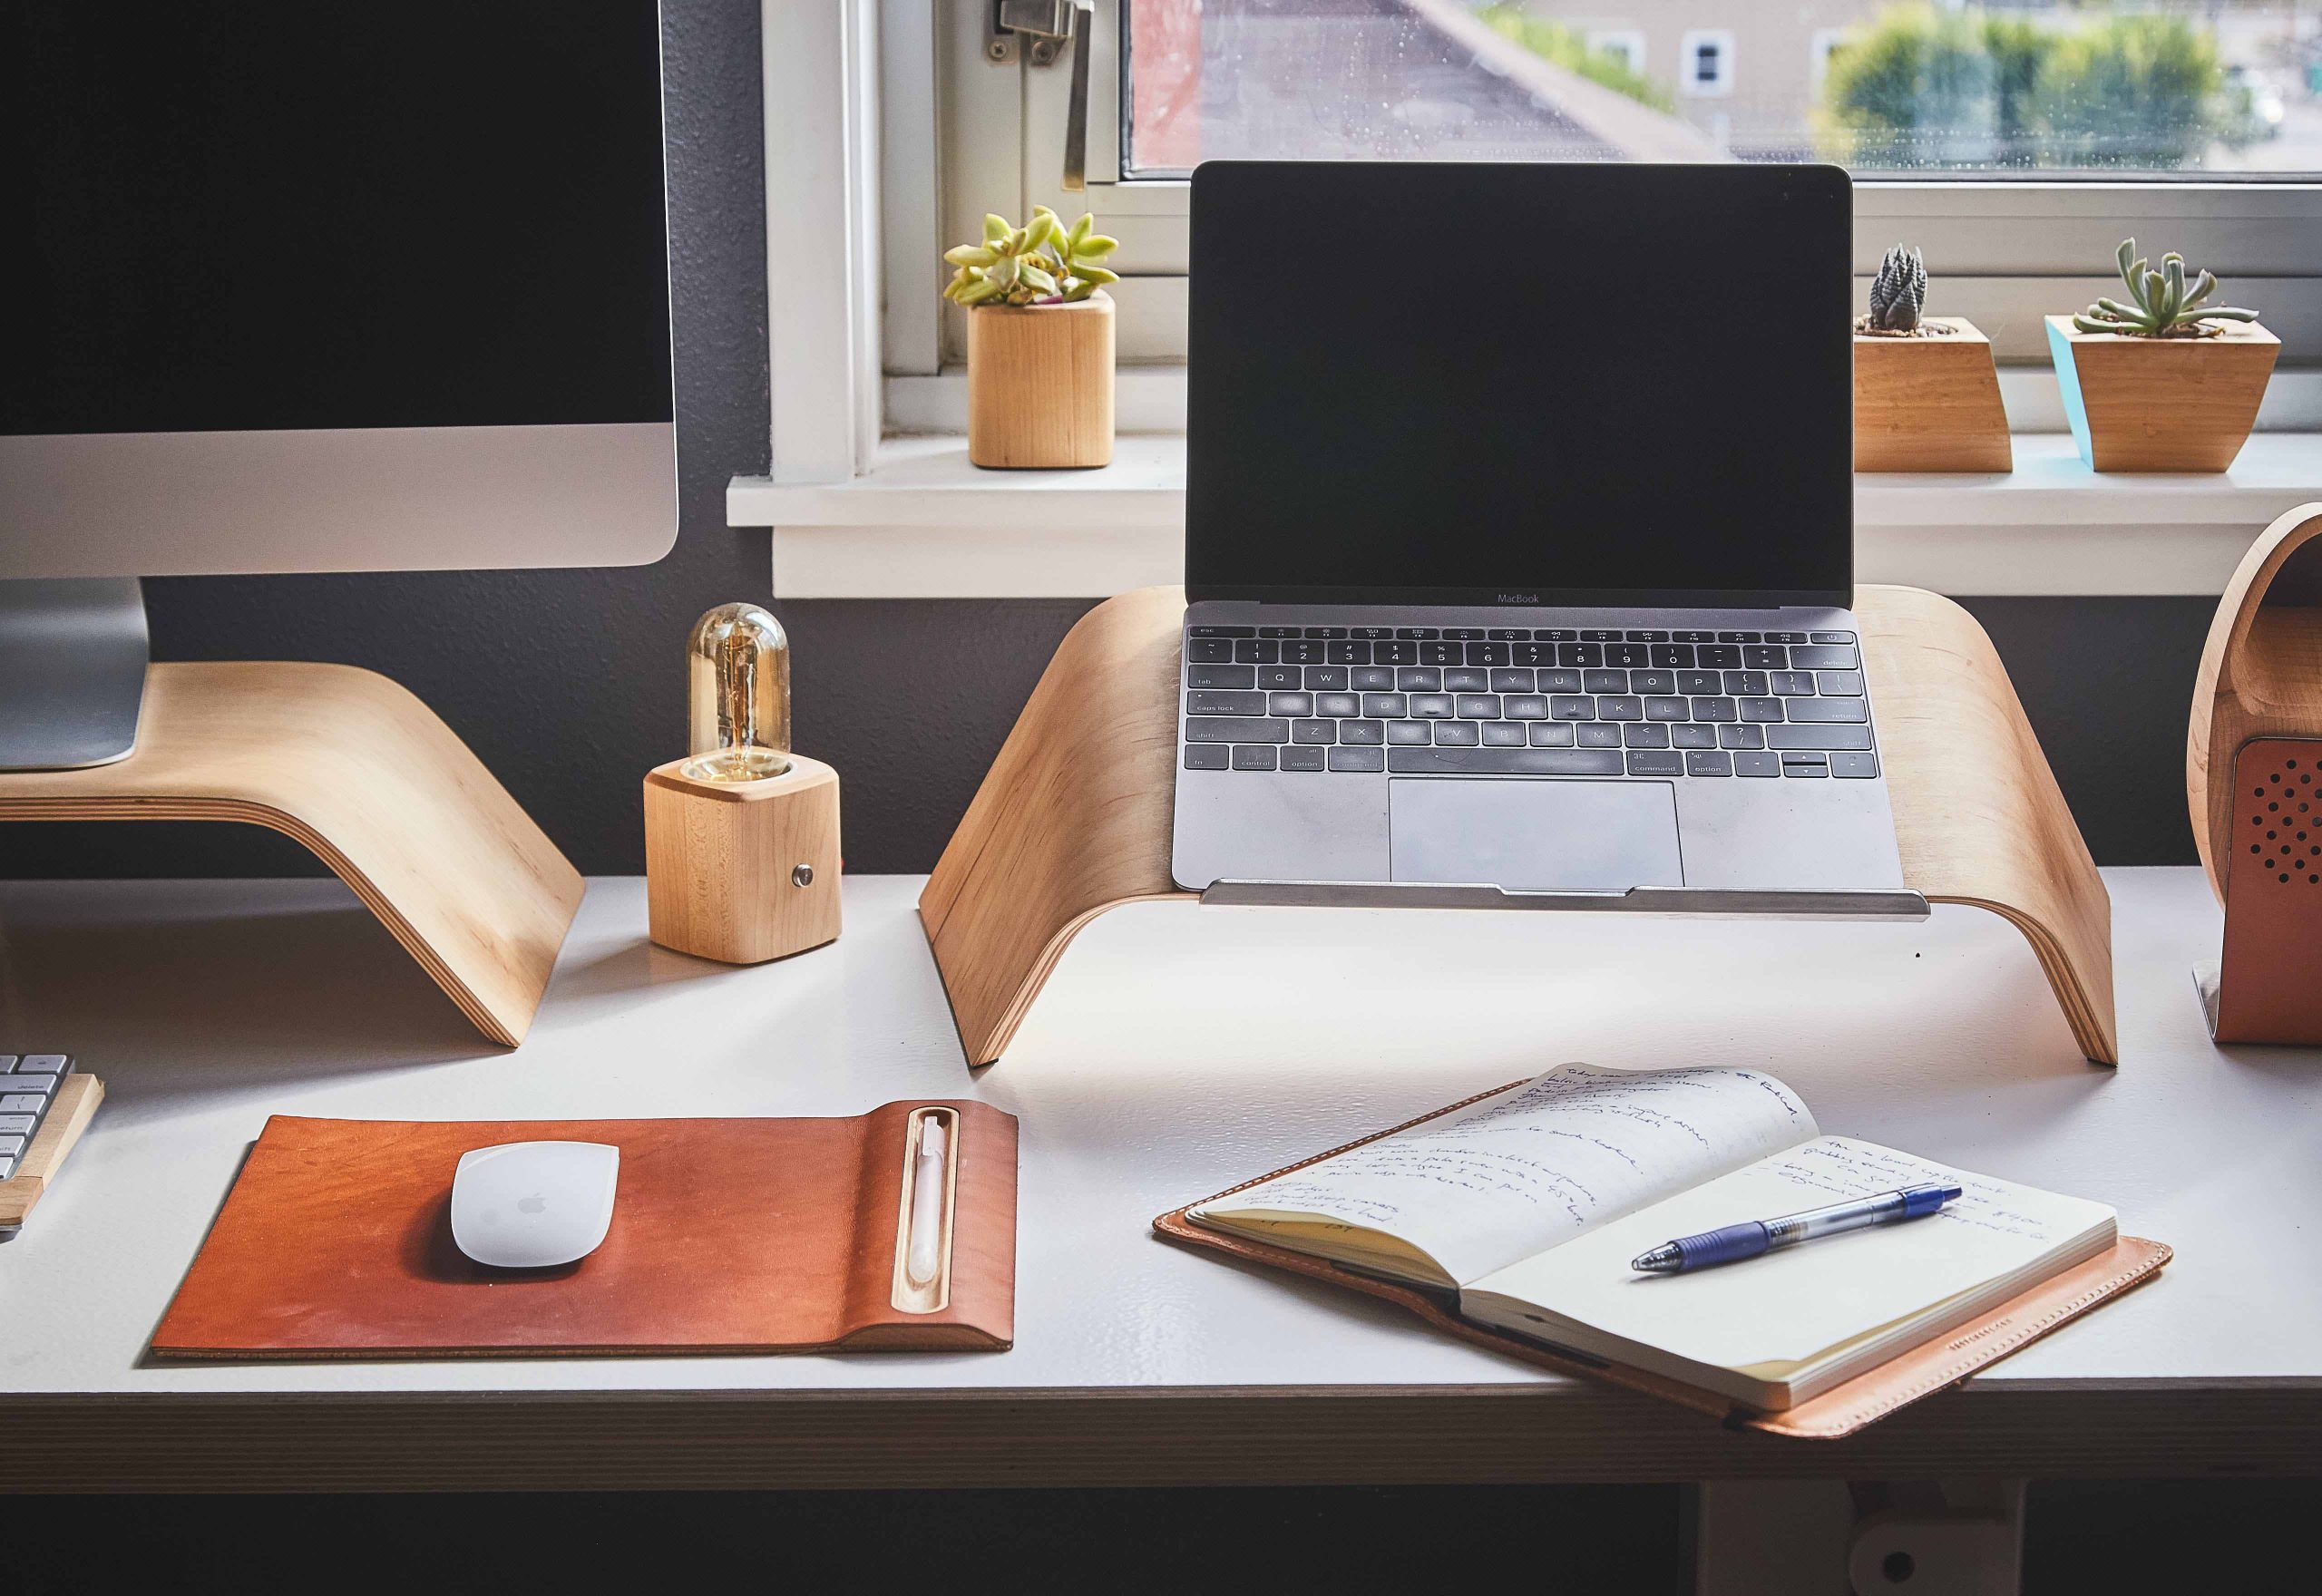 7 practical tech gadgets to level up your work-from-home station